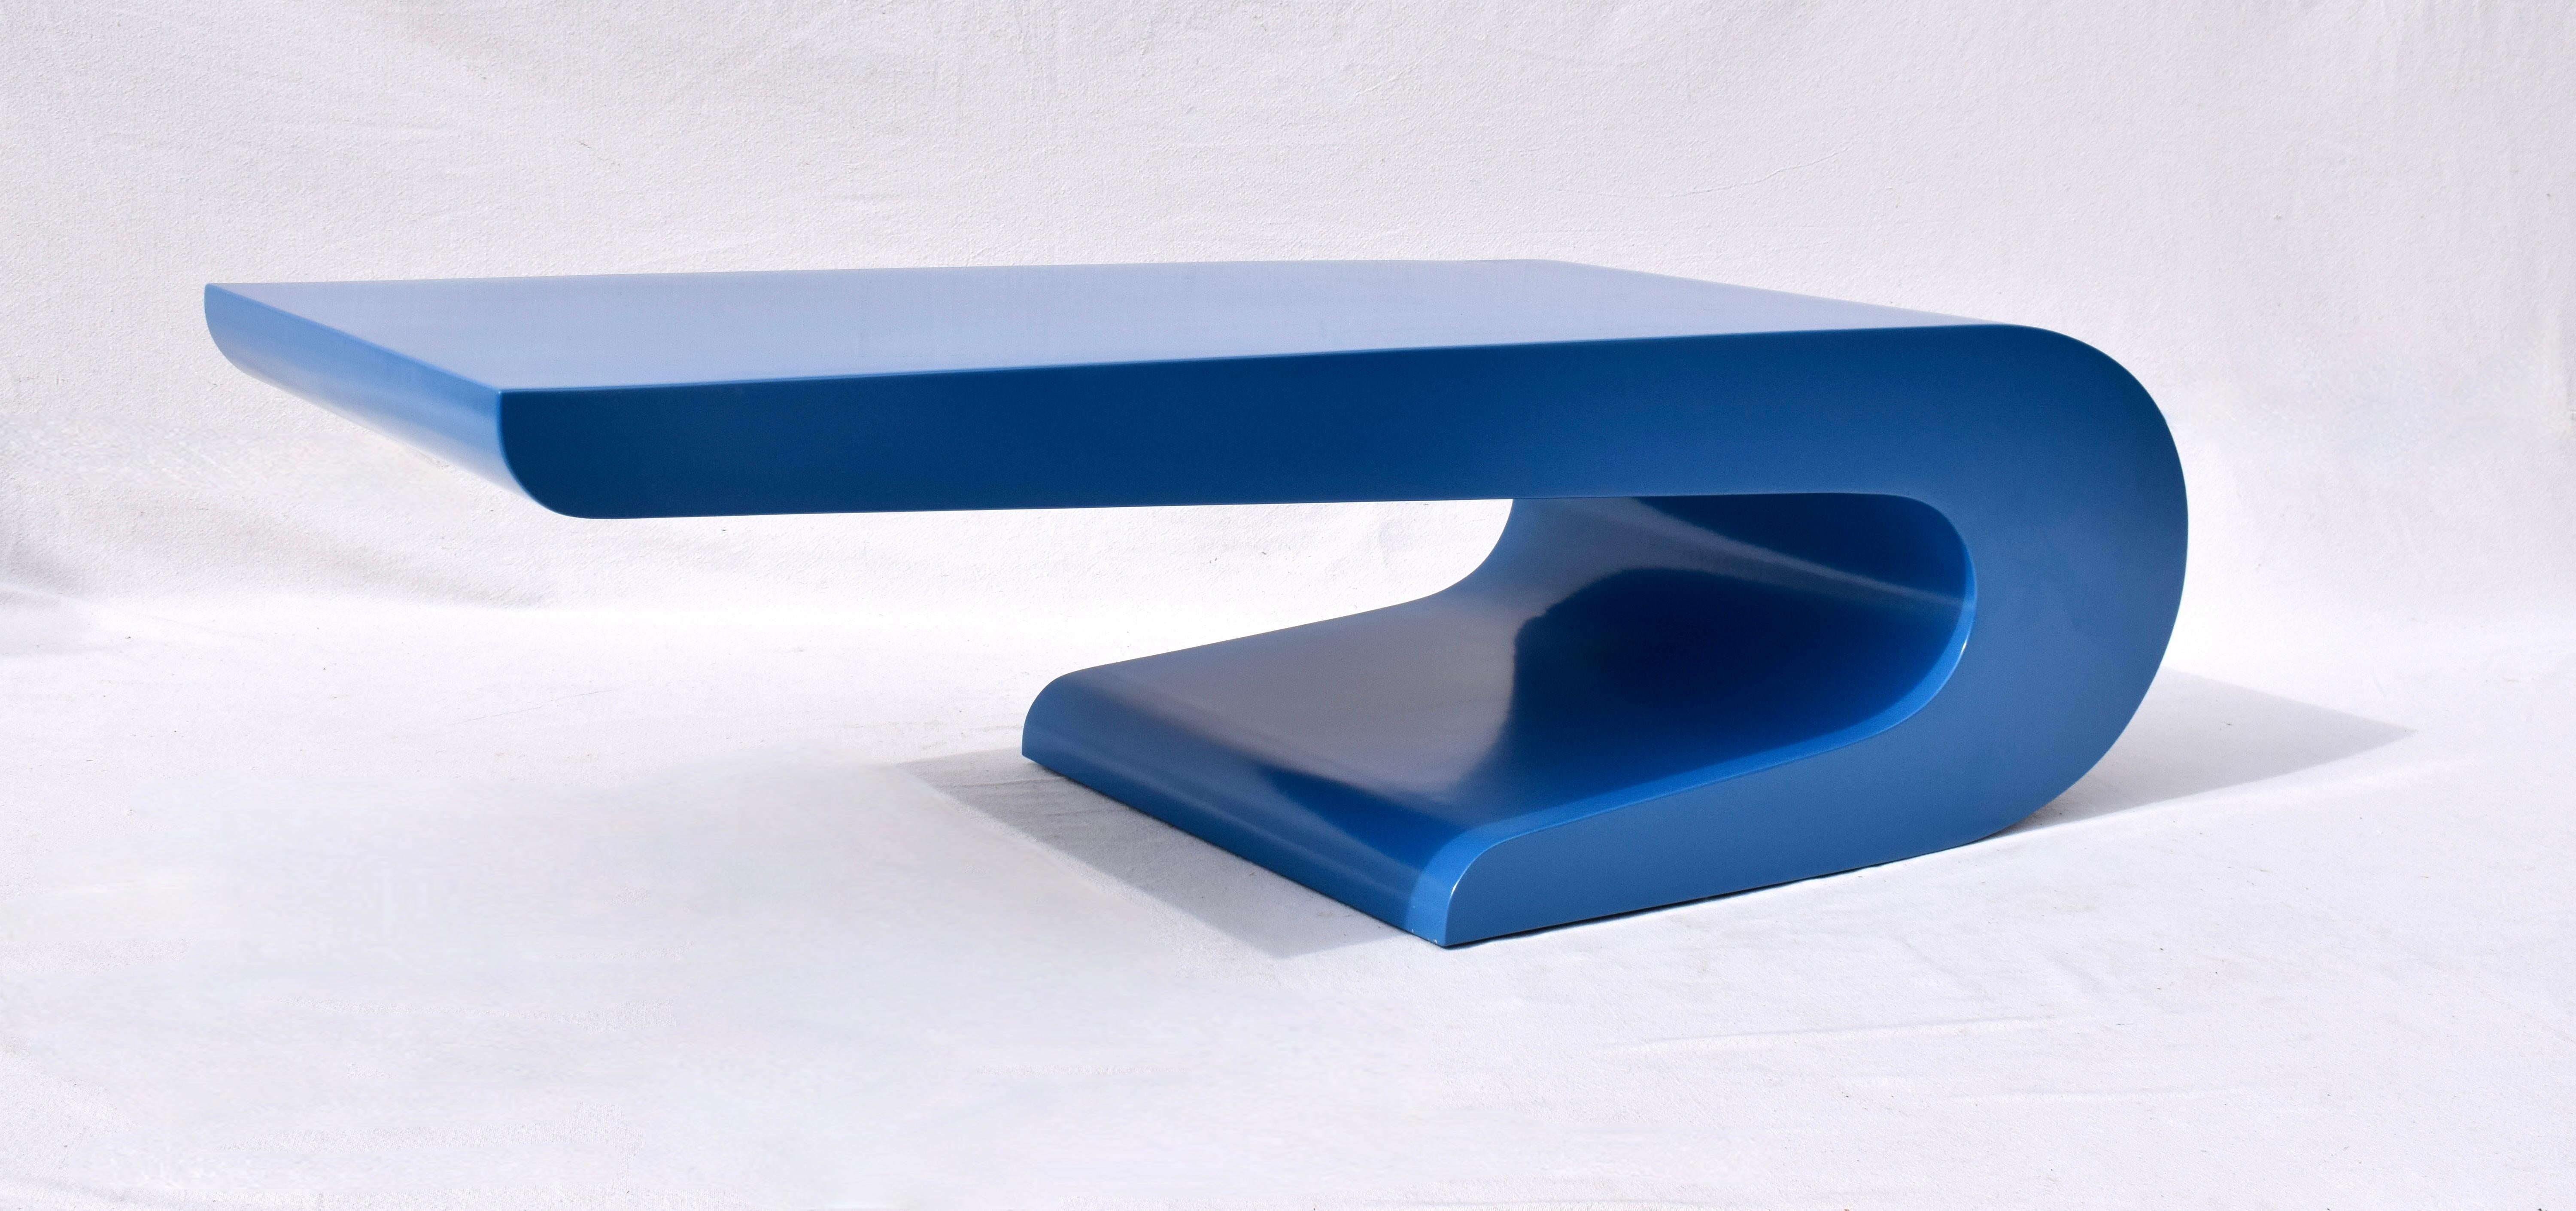 Cantilevered coffee or cocktail table rendered in wood with new Cerulean blue lacquered finish by Pierre Cardin. Simply exquisite.